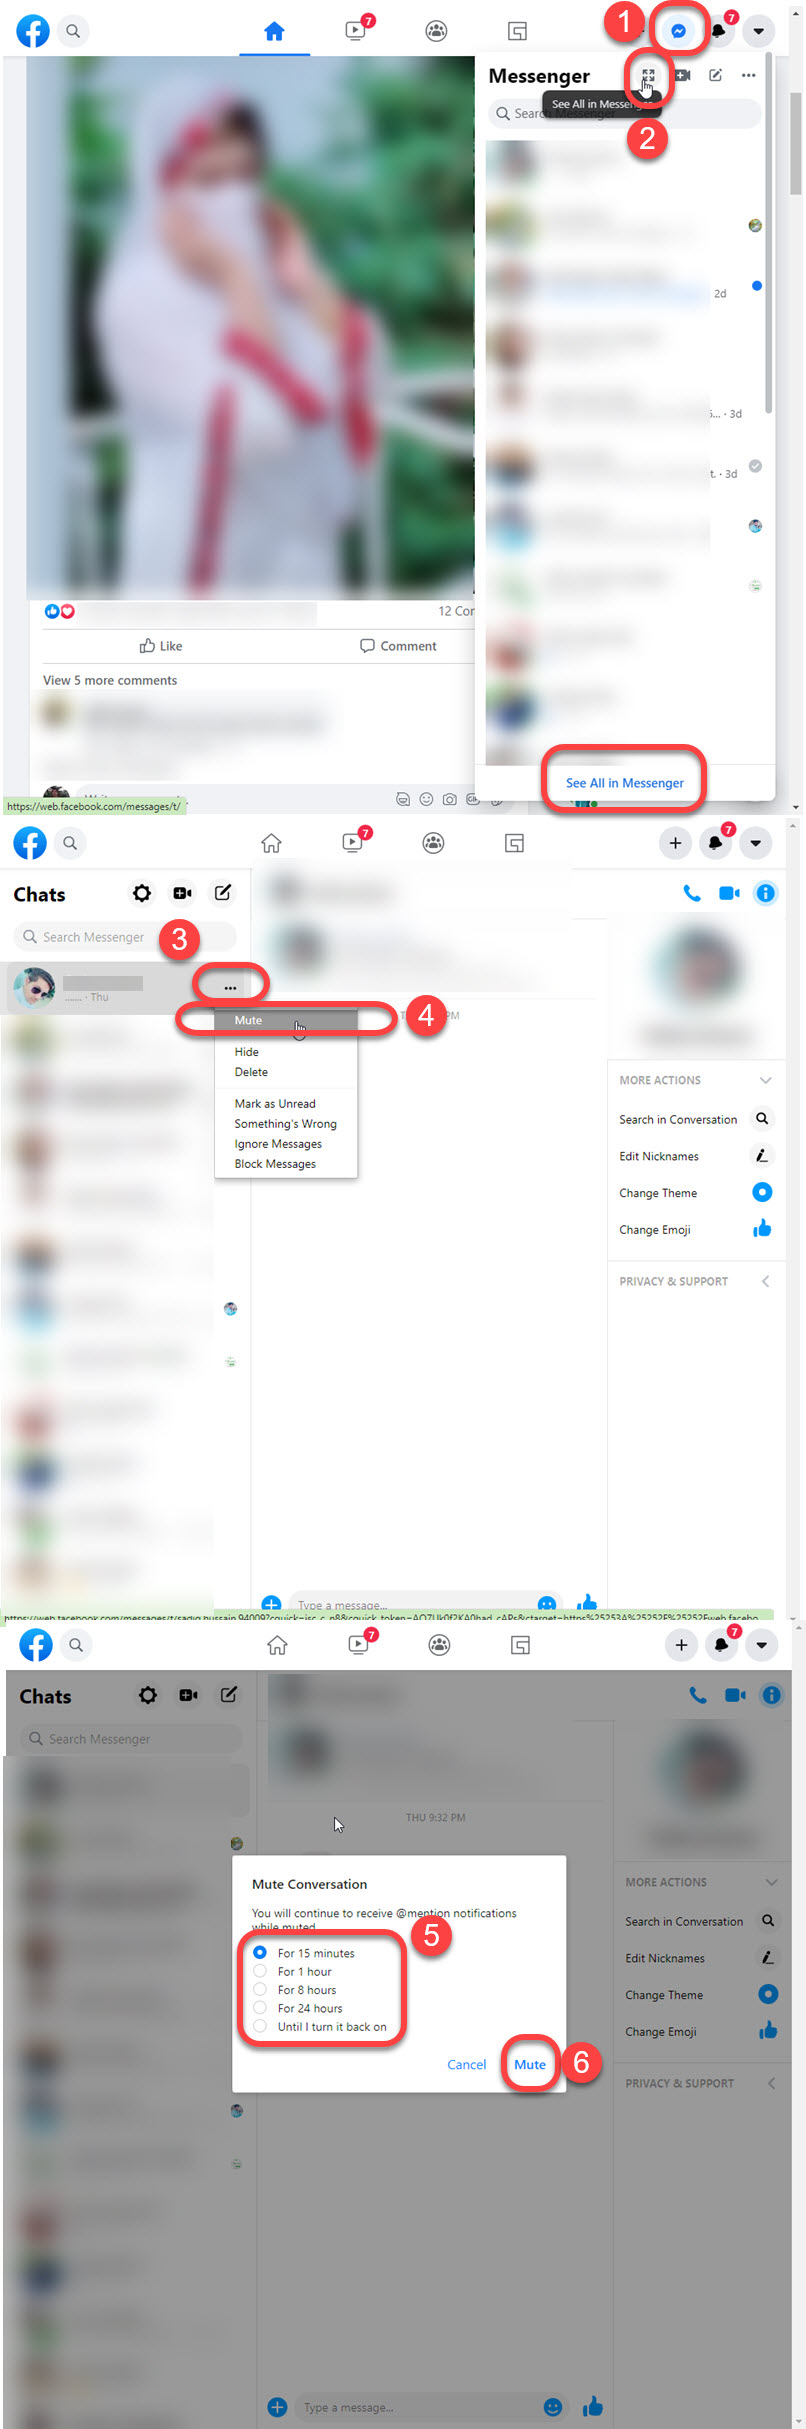 Turn off Messenger notifications on facebook.com for one person